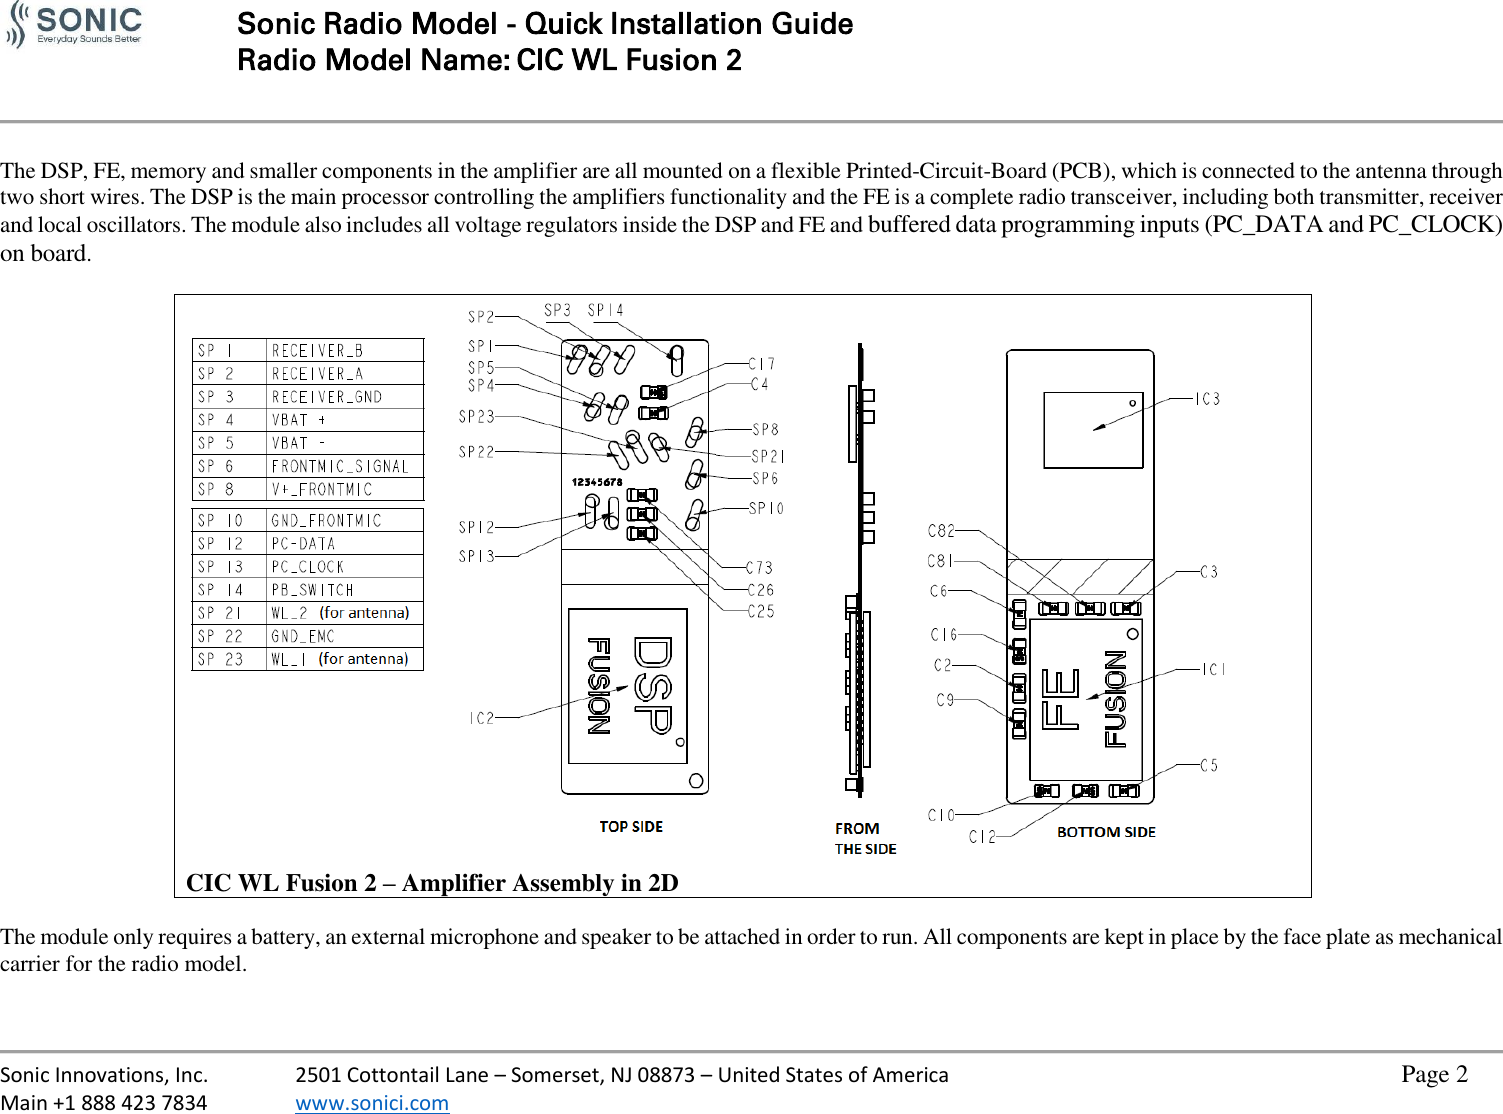   Sonic Radio Model - Quick Installation Guide Radio Model Name: CIC WL Fusion 2     Sonic Innovations, Inc.  2501 Cottontail Lane – Somerset, NJ 08873 – United States of America          Page 2 Main +1 888 423 7834  www.sonici.com            The DSP, FE, memory and smaller components in the amplifier are all mounted on a flexible Printed-Circuit-Board (PCB), which is connected to the antenna through two short wires. The DSP is the main processor controlling the amplifiers functionality and the FE is a complete radio transceiver, including both transmitter, receiver and local oscillators. The module also includes all voltage regulators inside the DSP and FE and buffered data programming inputs (PC_DATA and PC_CLOCK) on board.   CIC WL Fusion 2 – Amplifier Assembly in 2D  The module only requires a battery, an external microphone and speaker to be attached in order to run. All components are kept in place by the face plate as mechanical carrier for the radio model.  